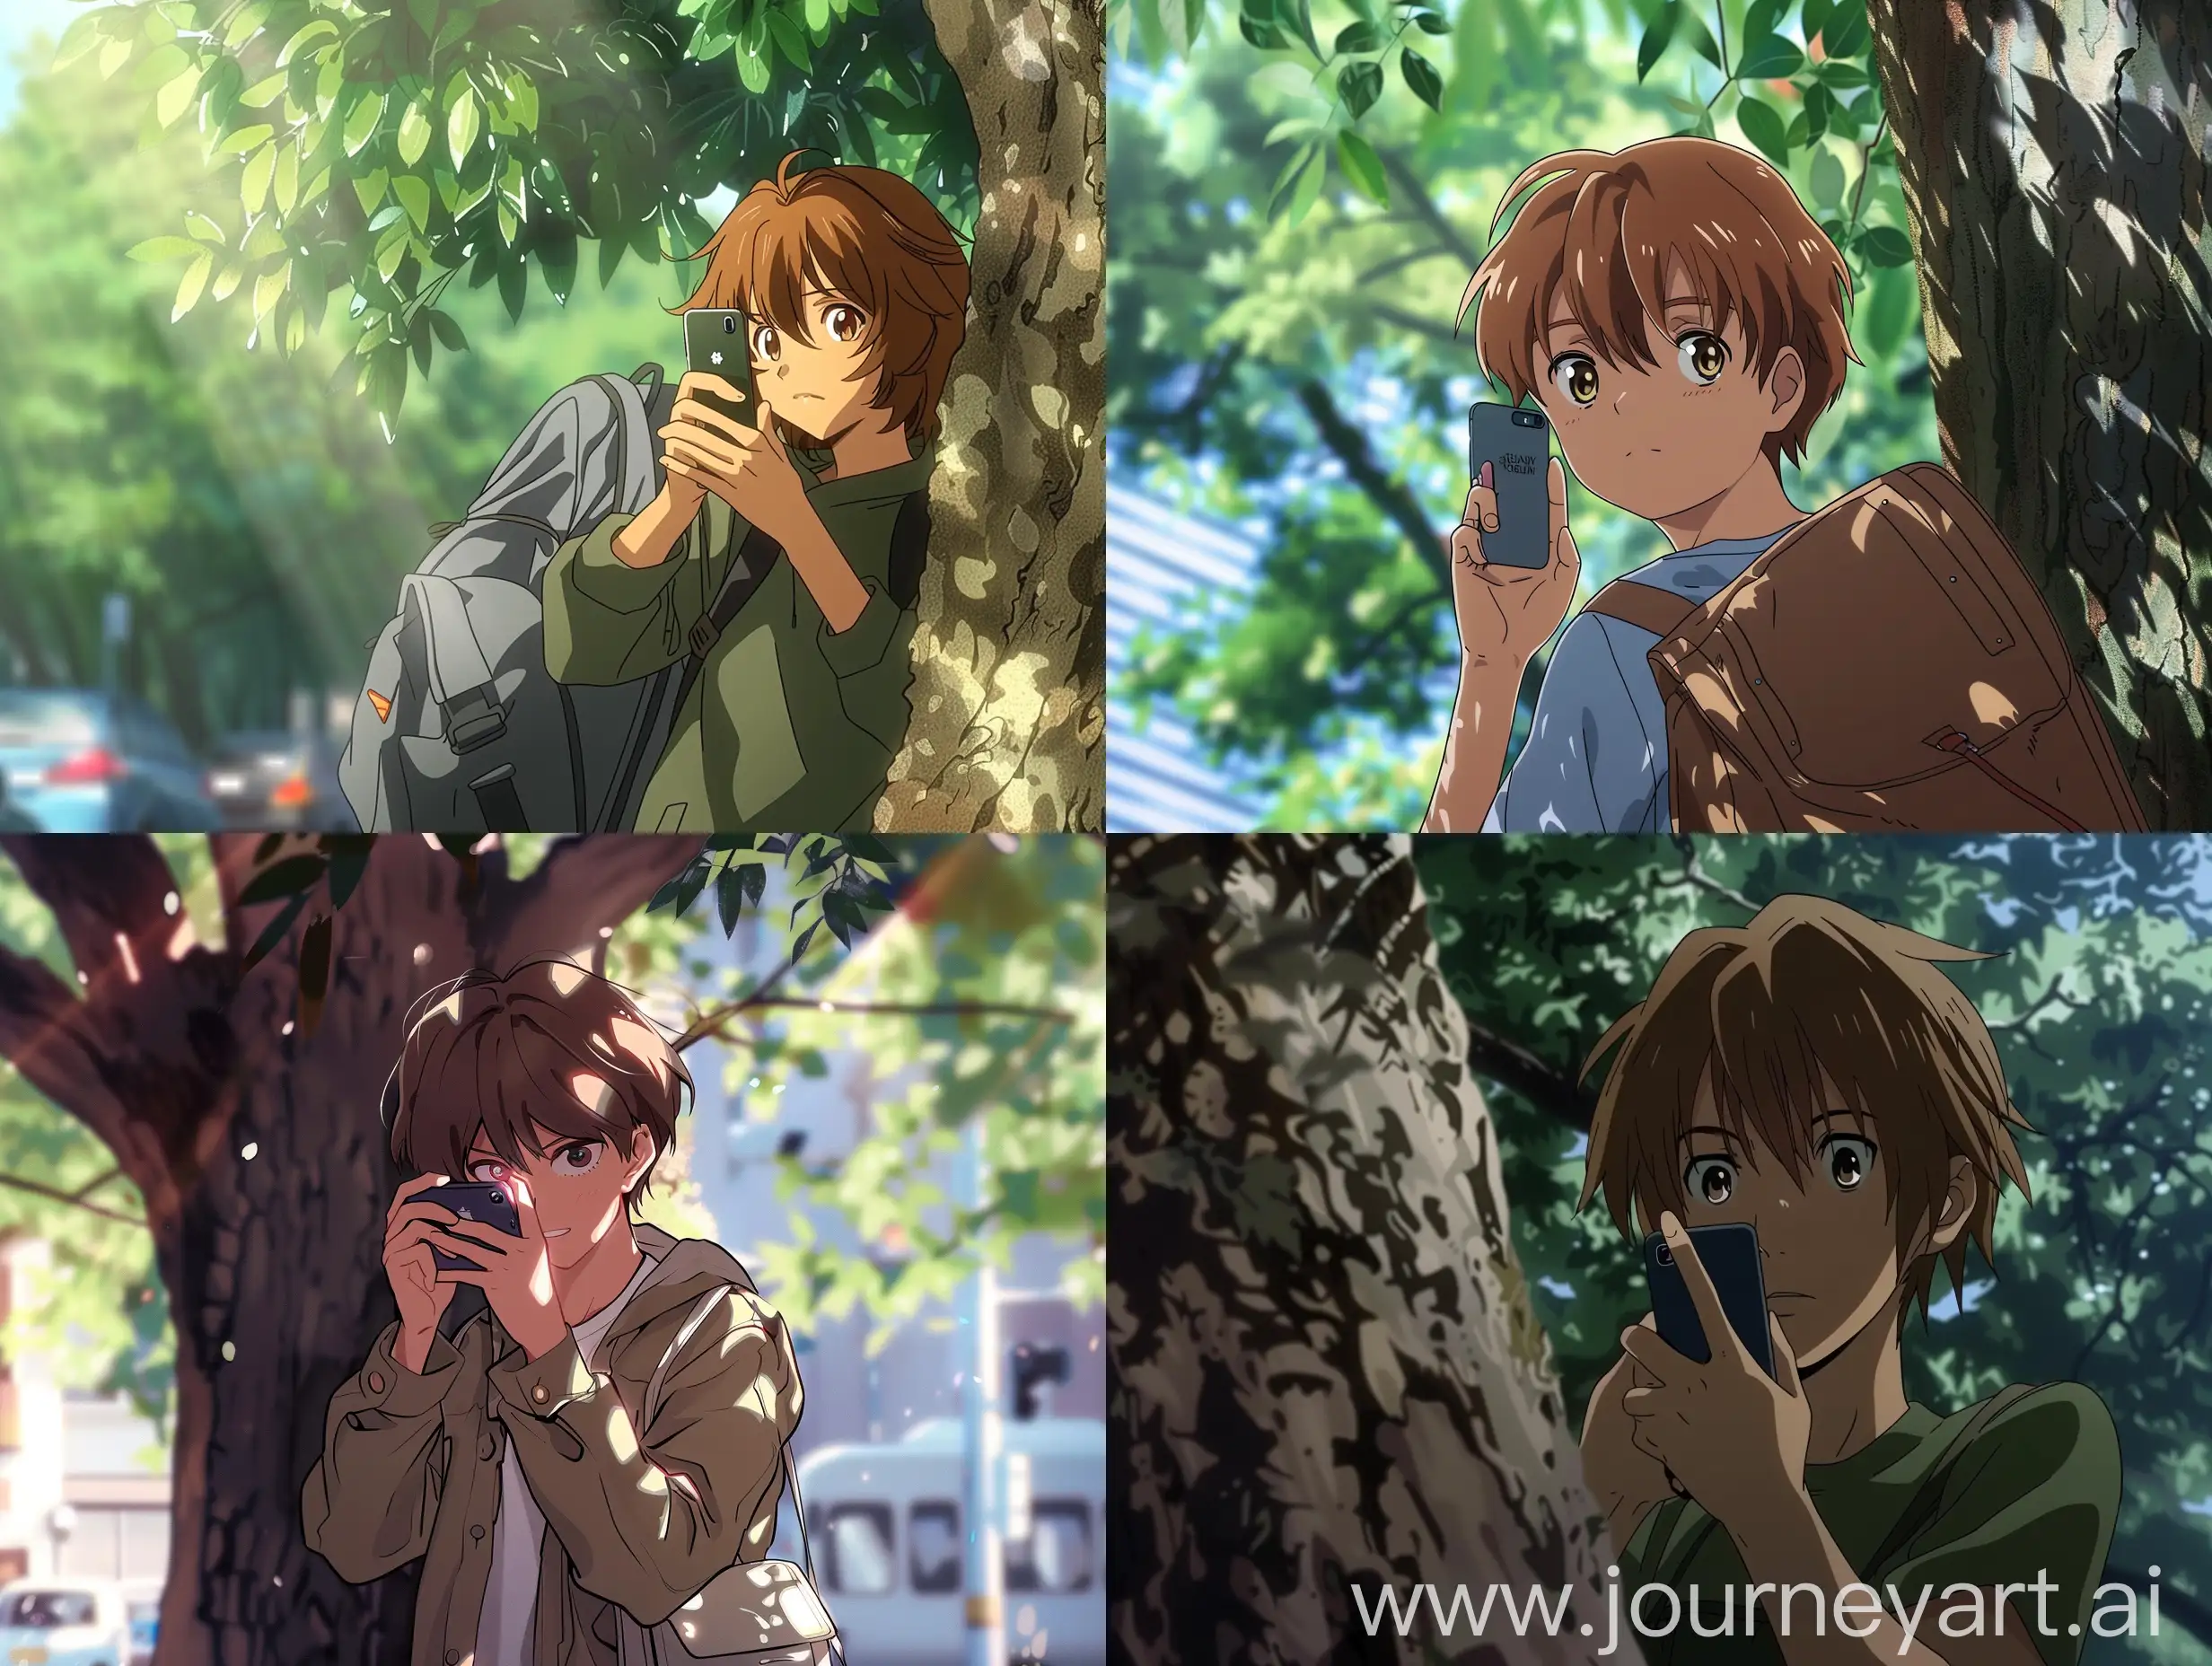 Anime-Youth-Secretly-Photographing-from-Behind-Tree